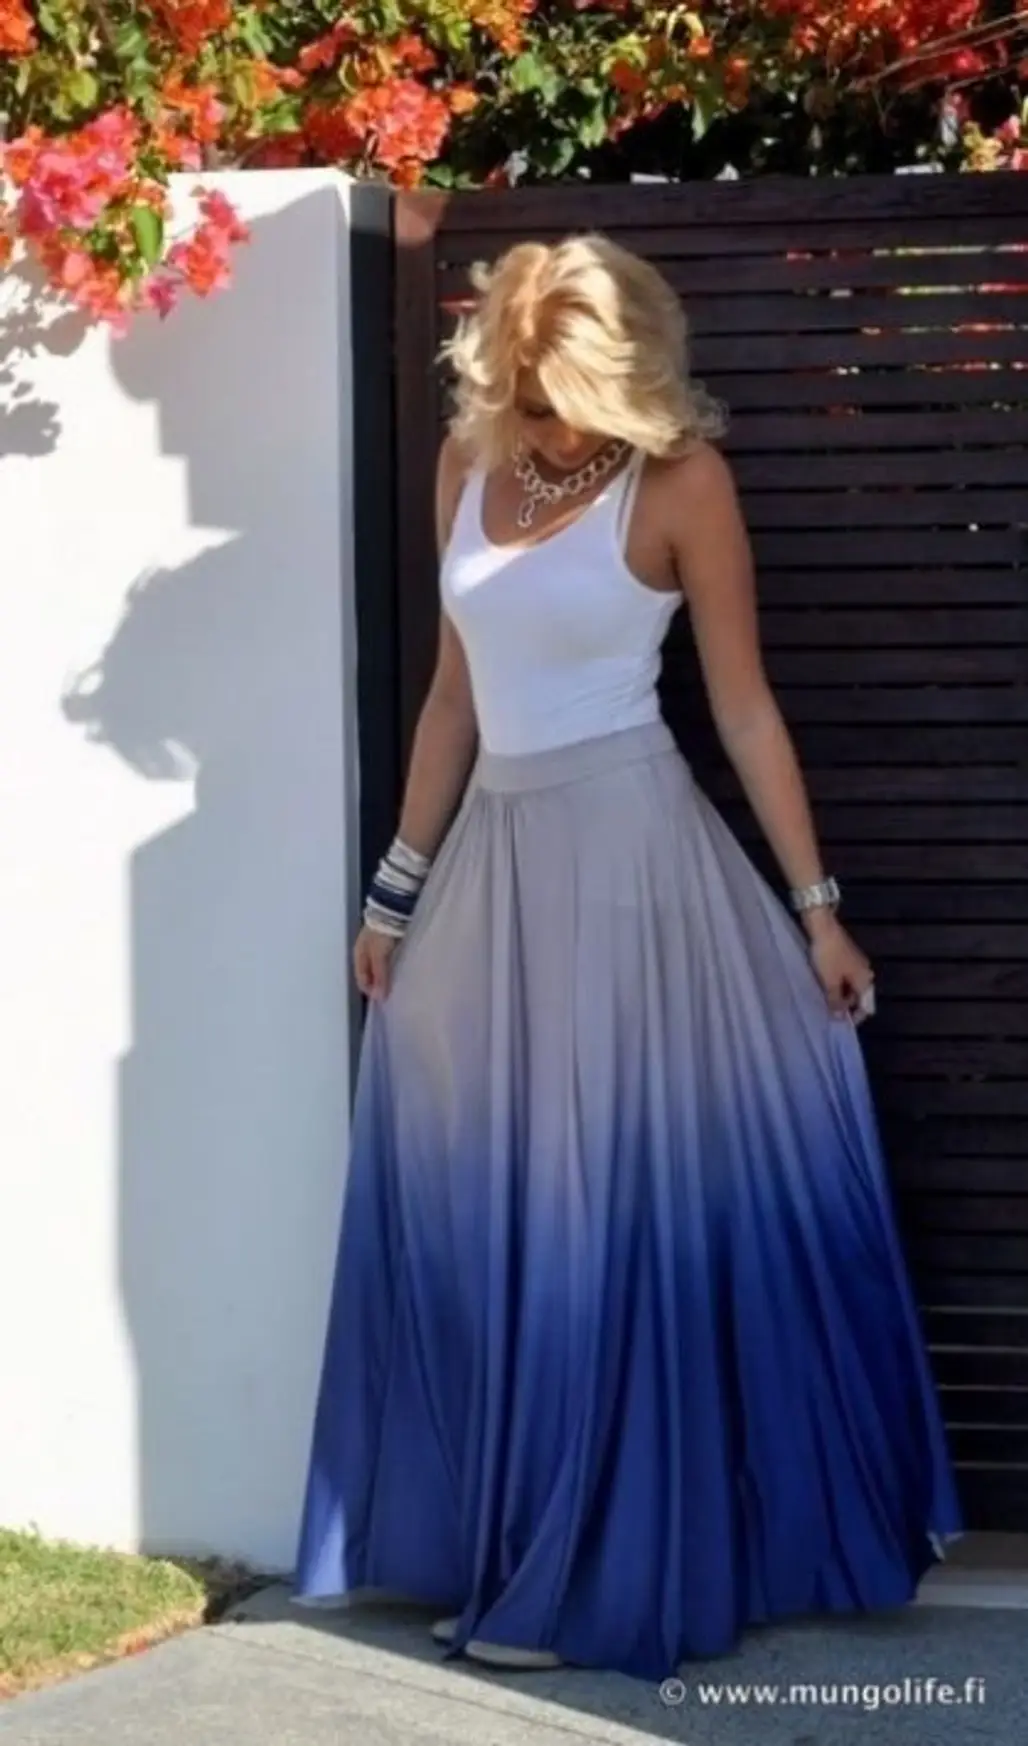 Maxi Skirt with a Tank Top